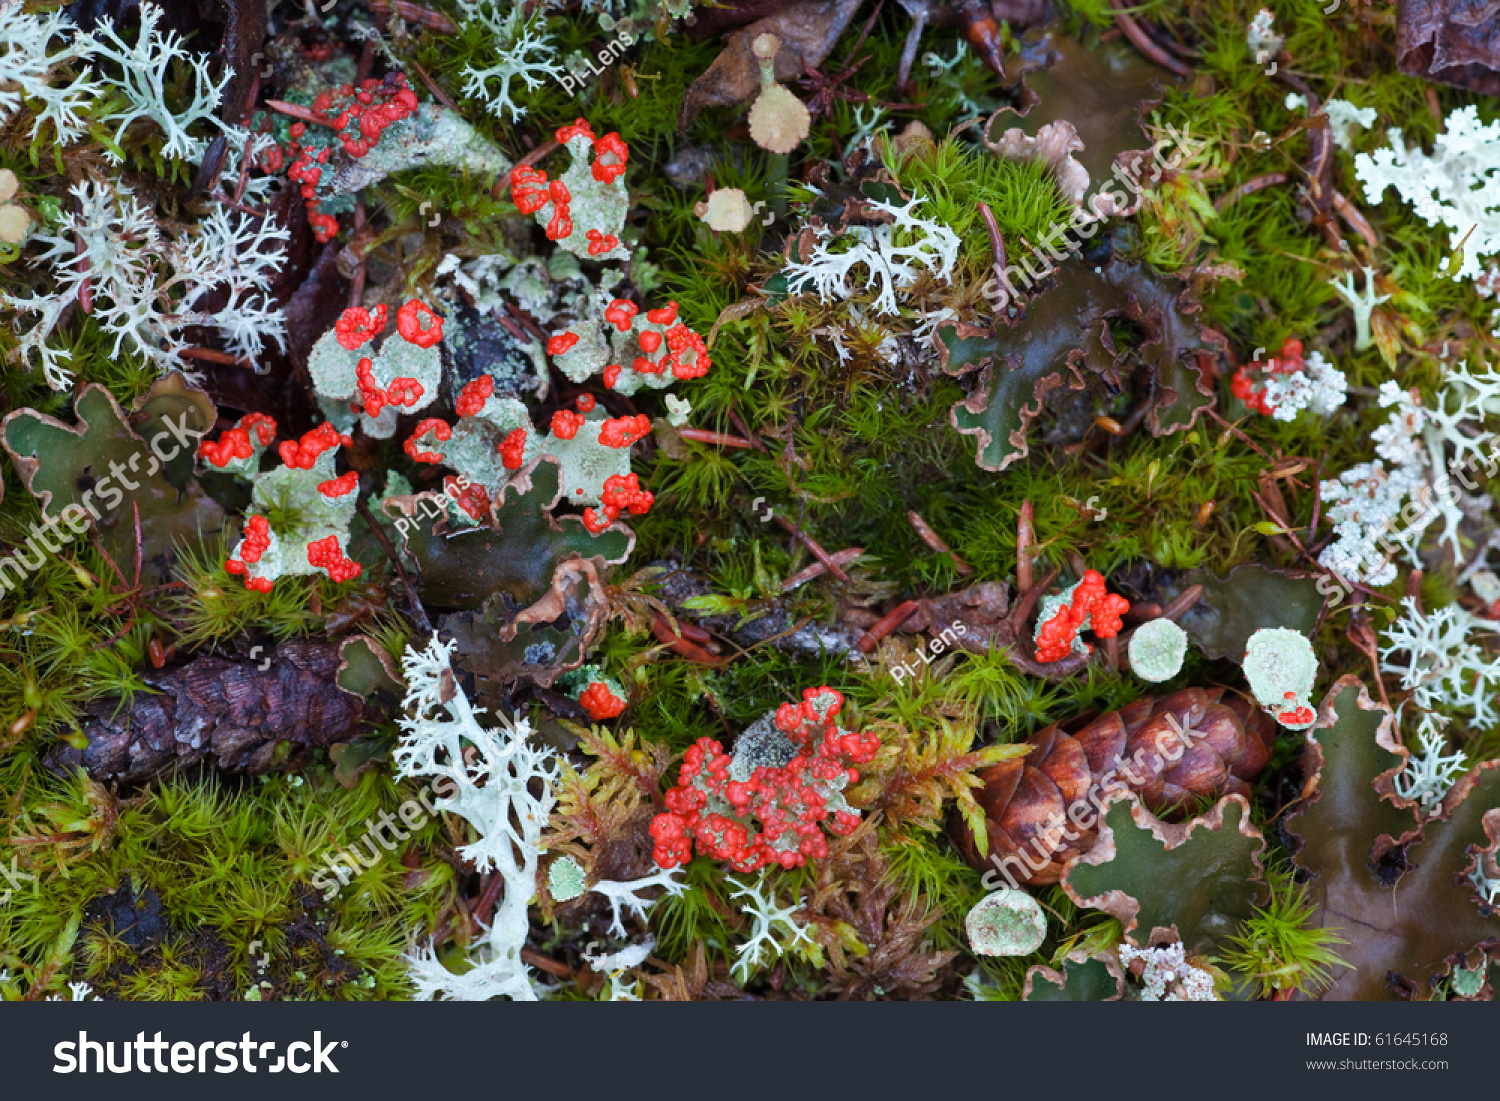 Forest floor closeup with Red Pixie Cup (Cladonia coccifera) lichens #61645168